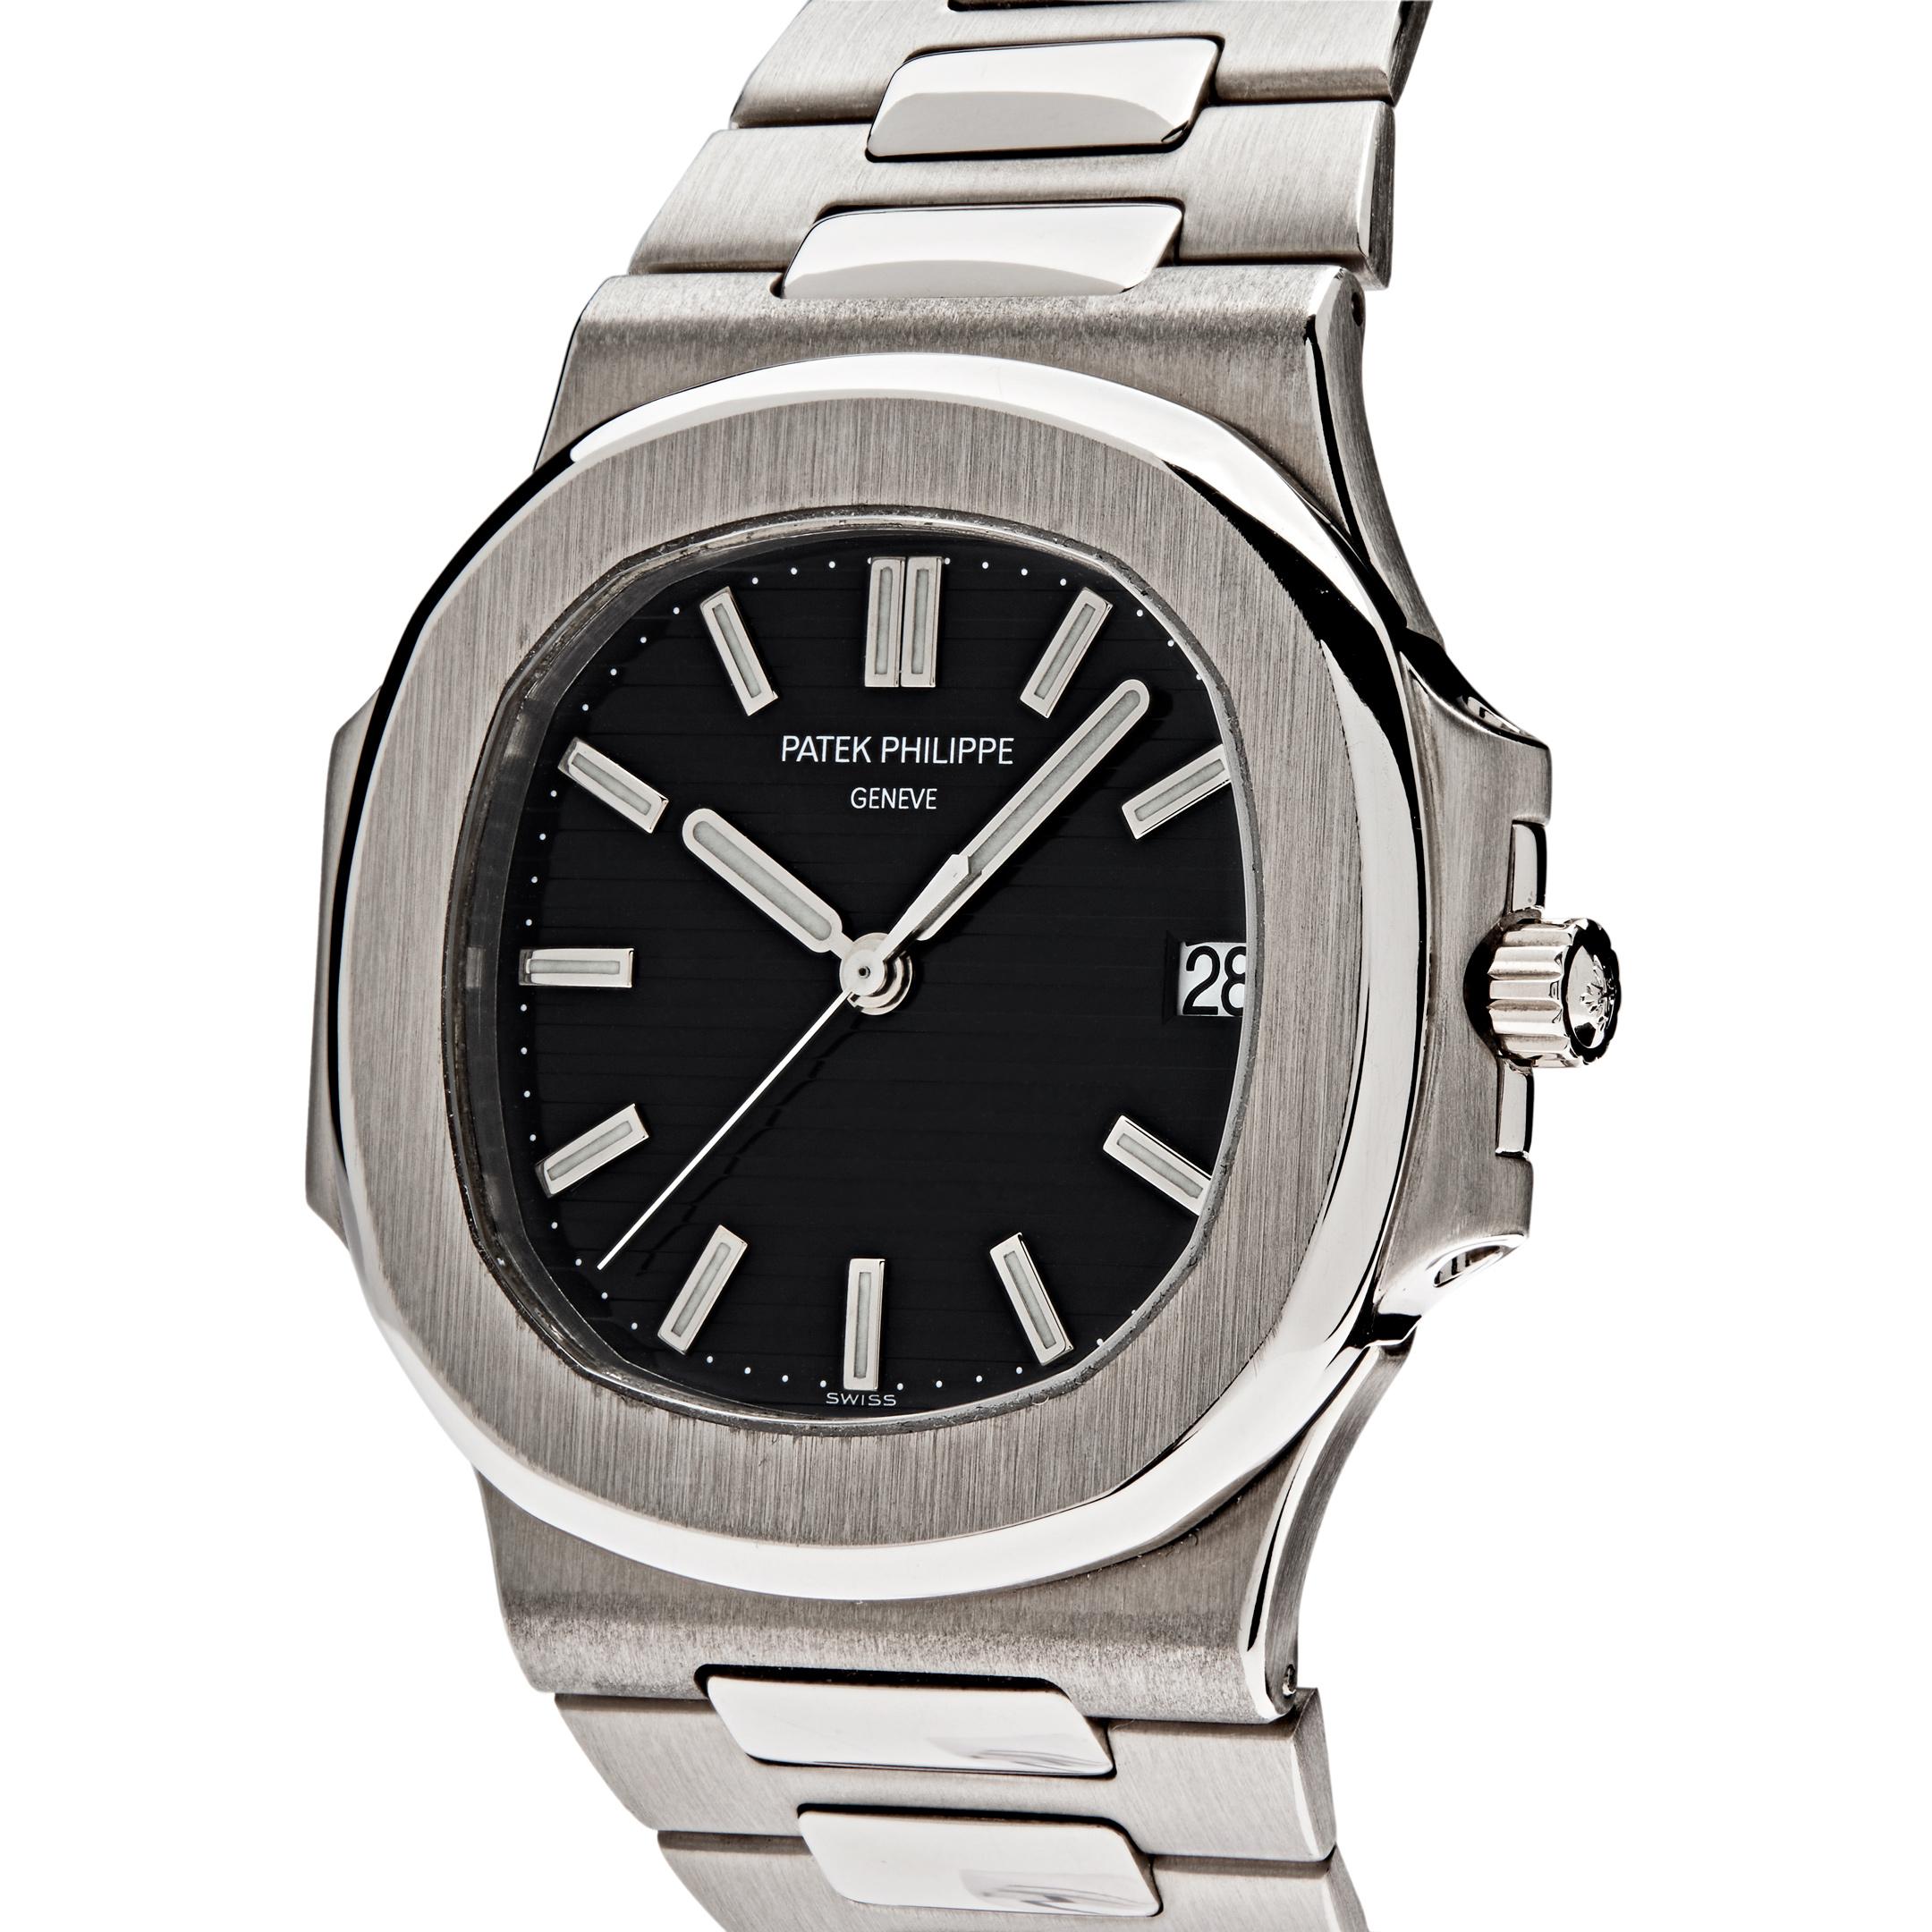 This Patek Philippe Nautilus watch keeps the same basic design appeal as the 